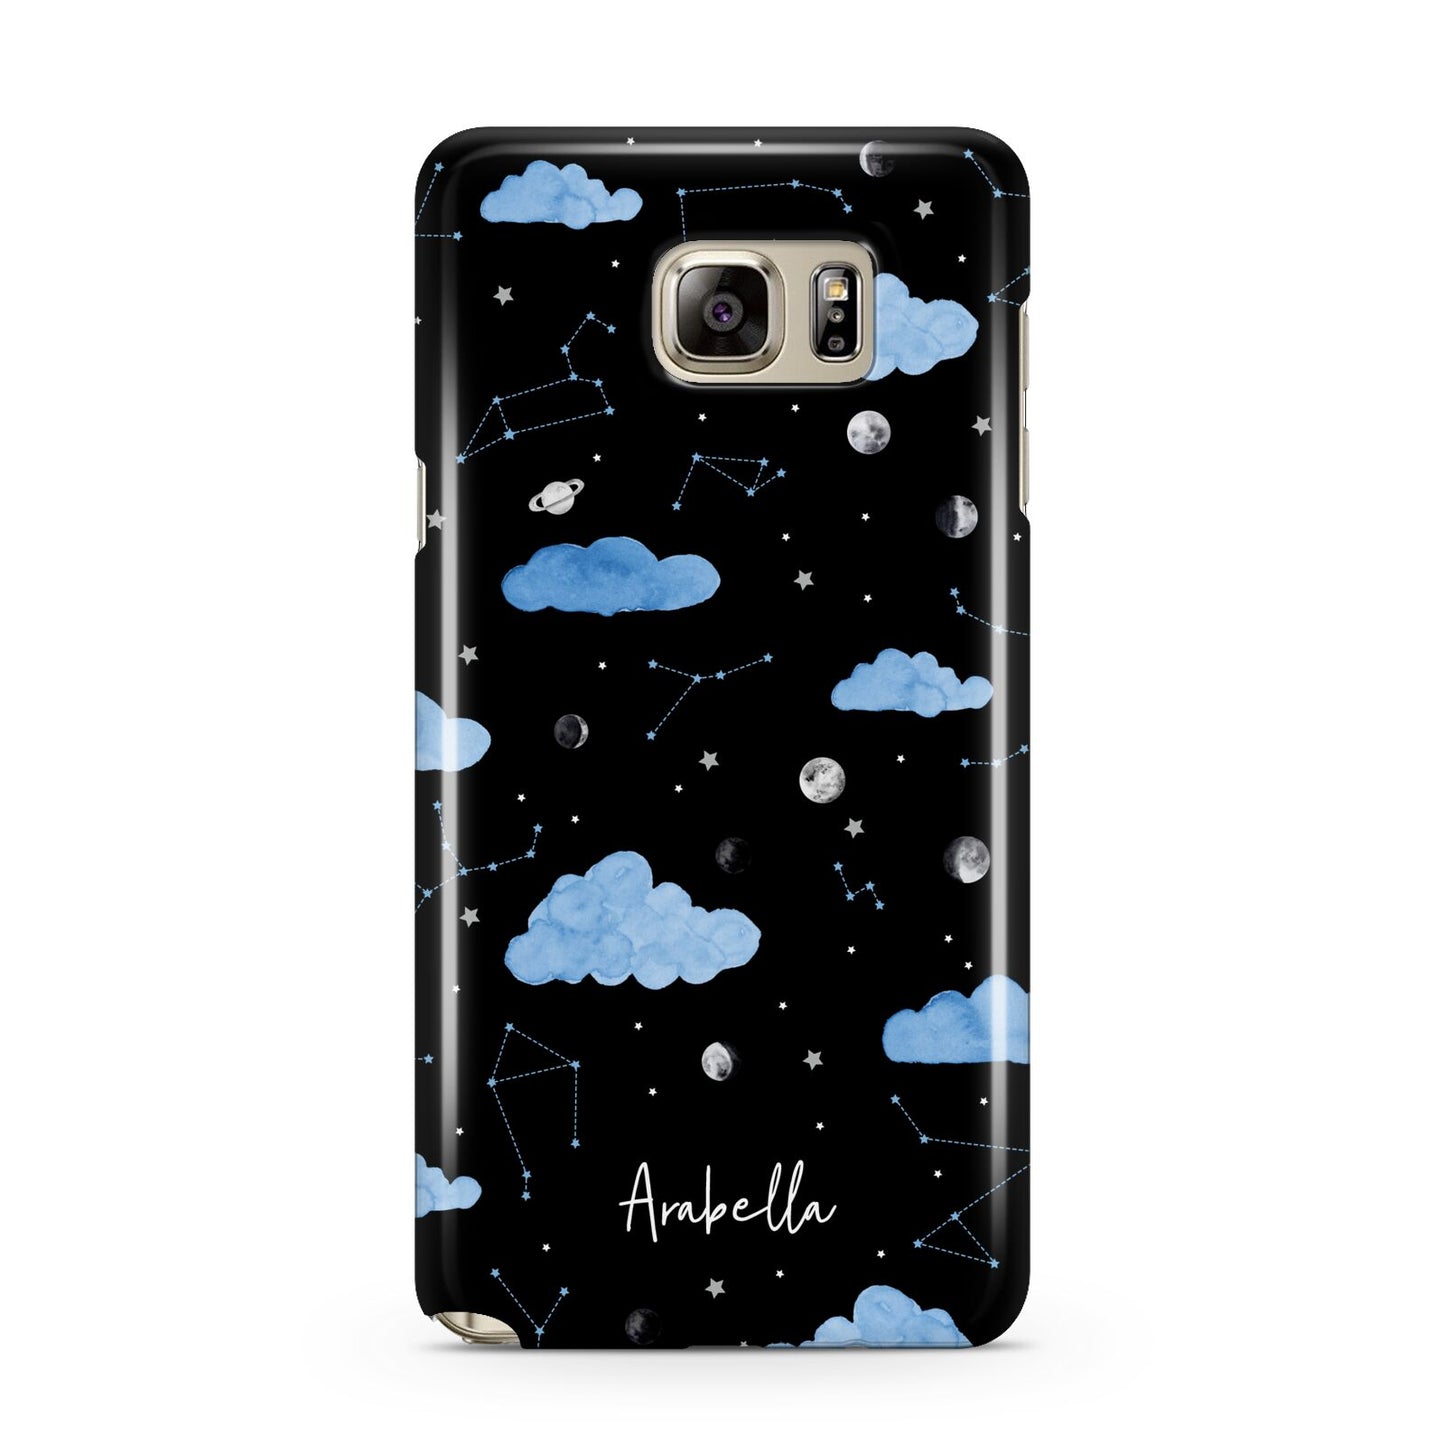 Cloudy Night Sky with Name Samsung Galaxy Note 5 Case